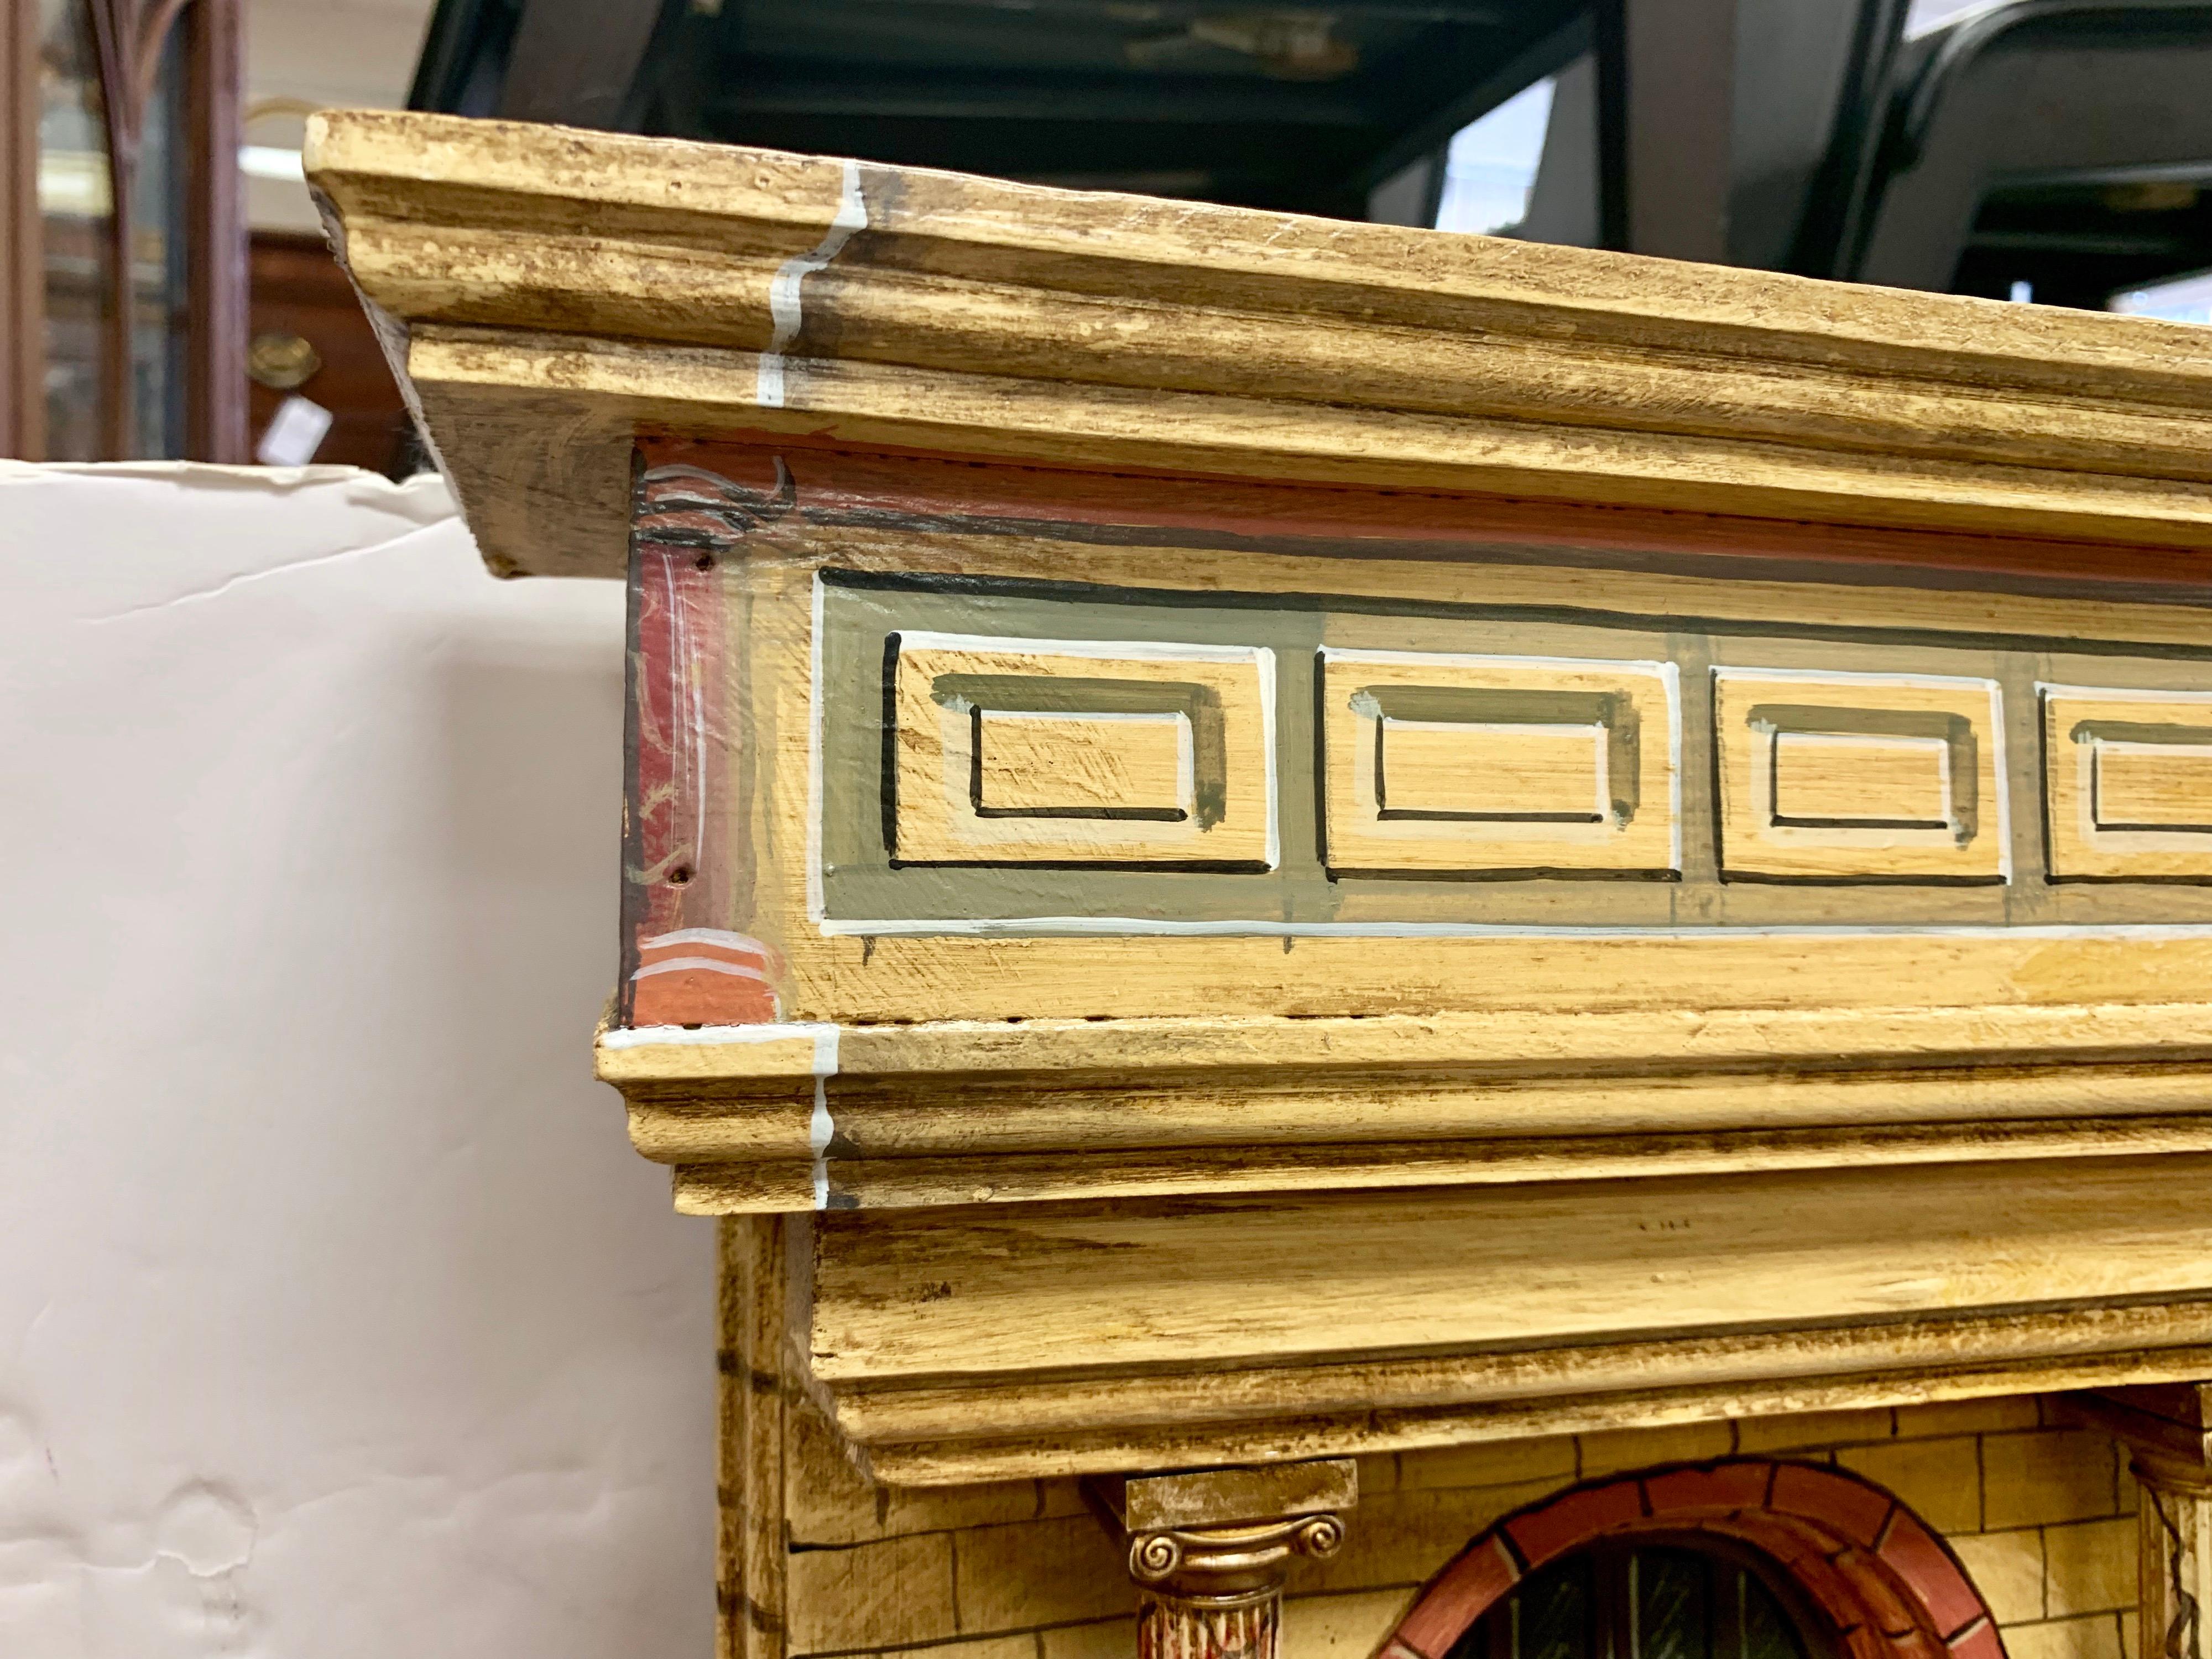 Original Trompe L'oeil painting on board in frame. The painting is original but it is unsigned. If you appreciate architectural Trompe L'oeils, this one is not to be missed. The medium is oil on board.
  